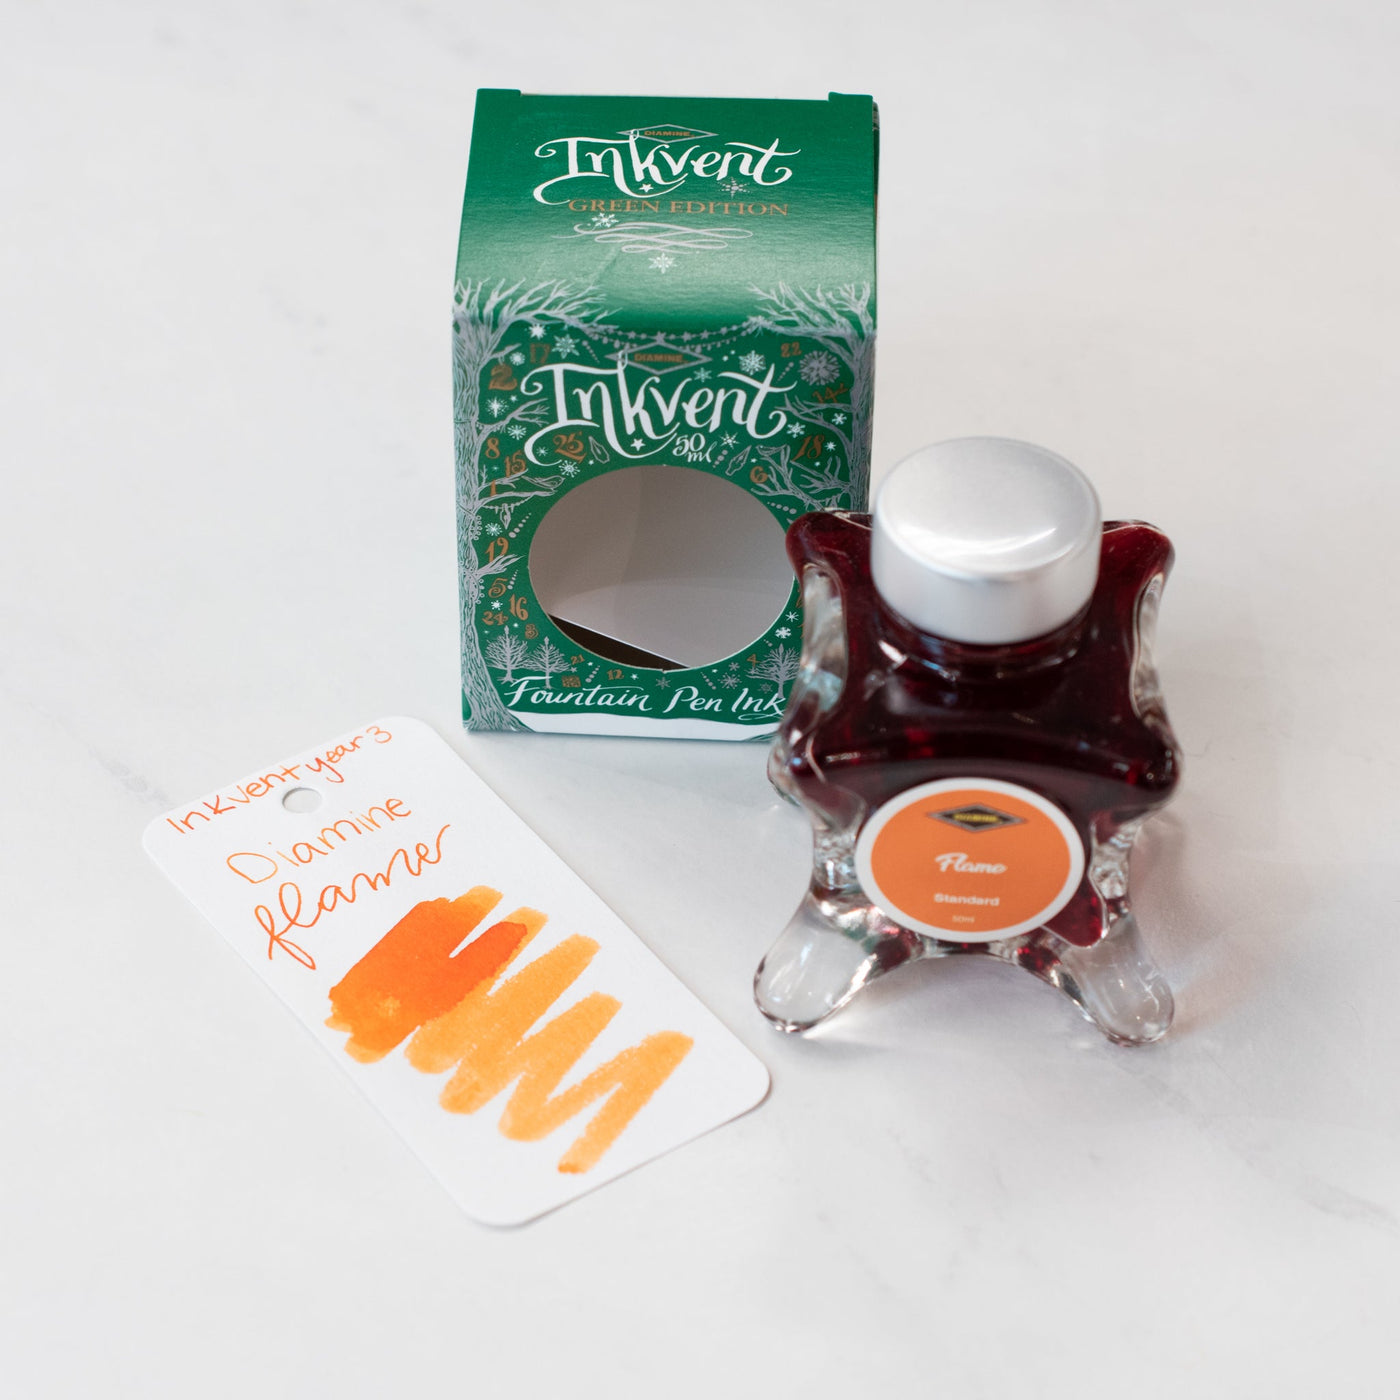 Diamine Inkvent Year 3 Flame Ink Bottle